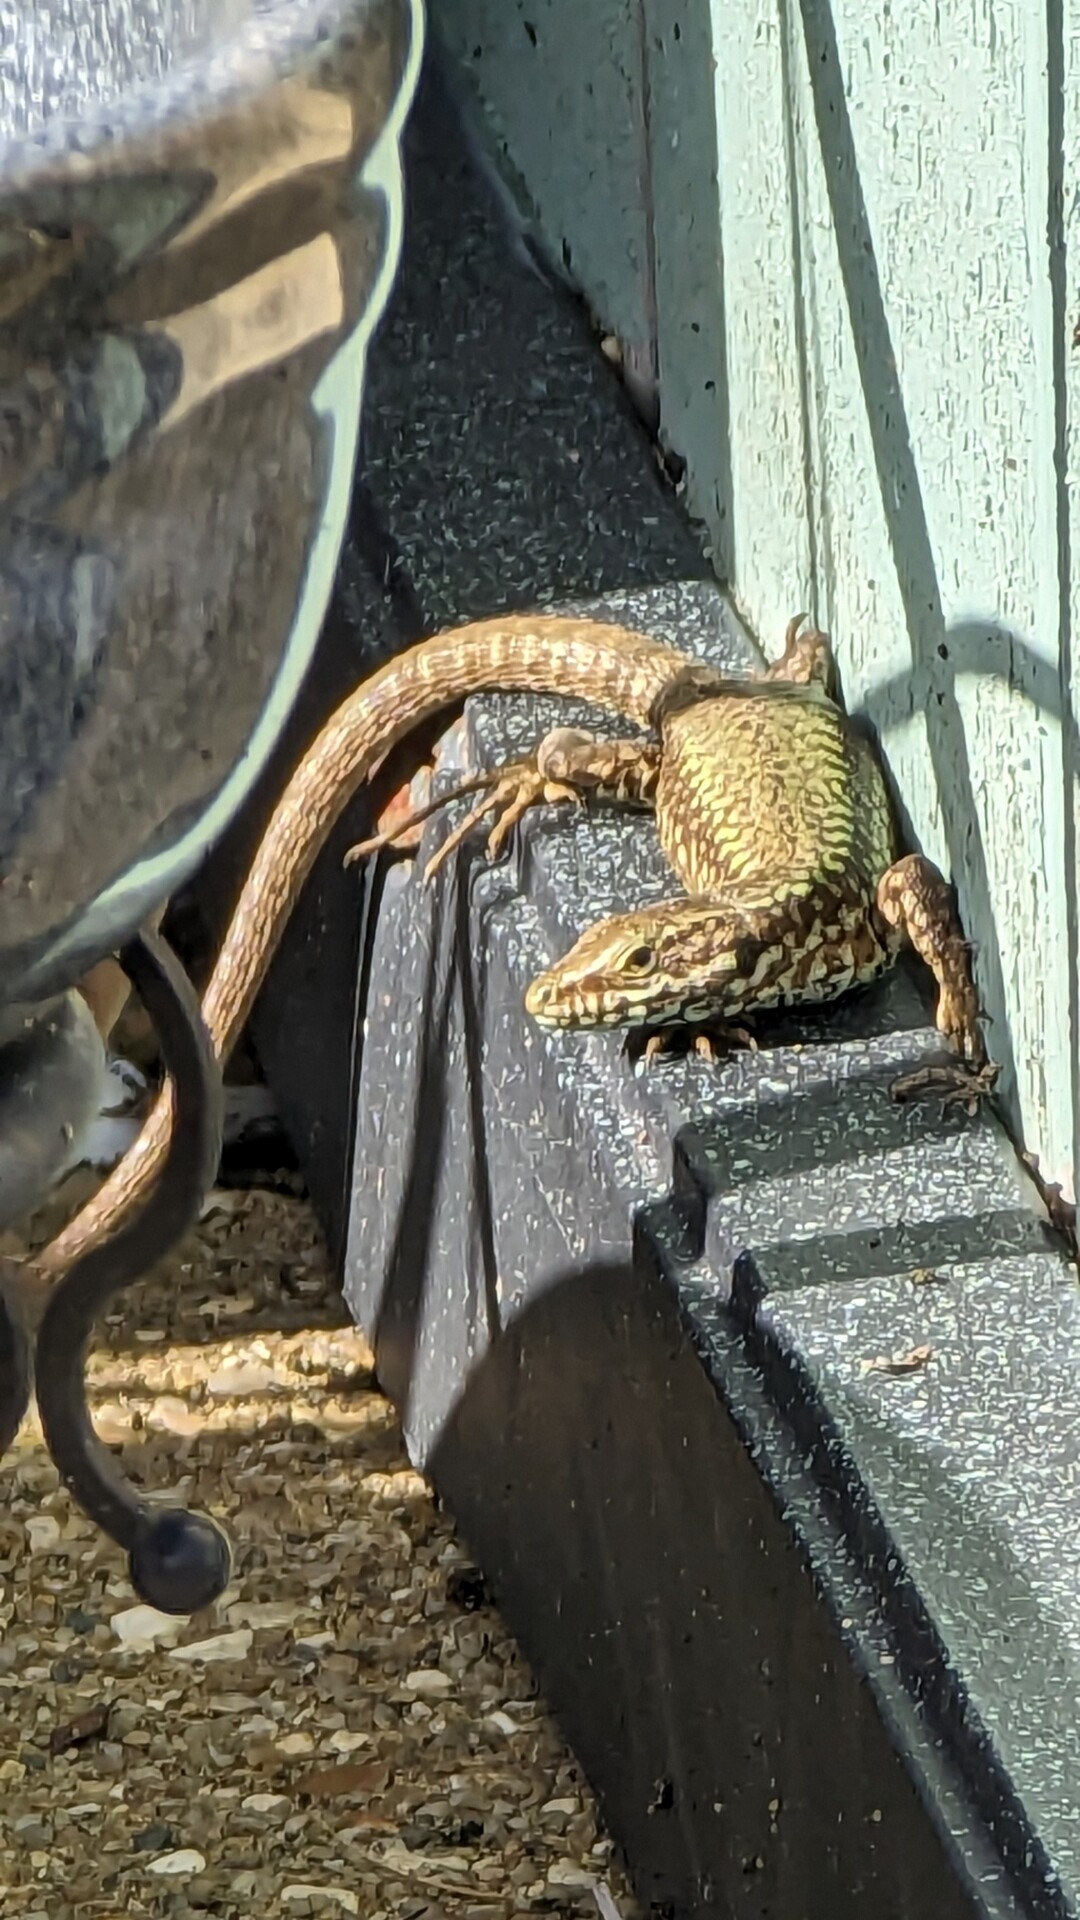 A common wall lizard that is facing forward and has brown and yellow patterned skin. It is perched on a raised ledge of a storage box and its tail is curved to the left and out of shot.